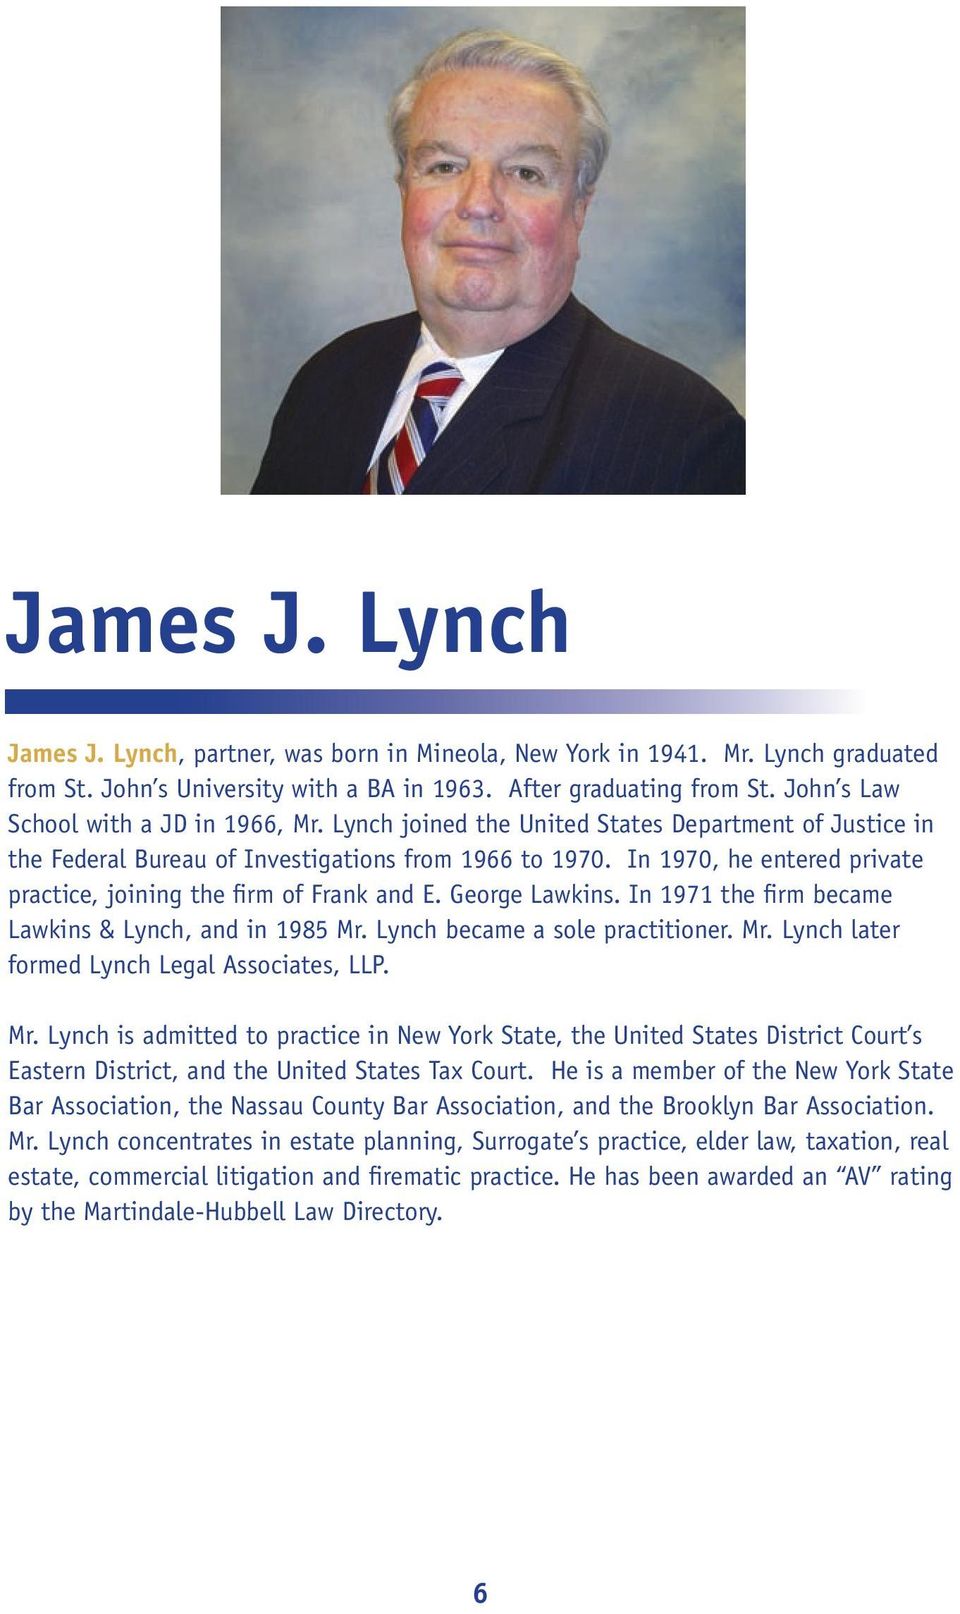 In 1970, he entered private practice, joining the firm of Frank and E. George Lawkins. In 1971 the firm became Lawkins & Lynch, and in 1985 Mr. Lynch became a sole practitioner. Mr. Lynch later formed Lynch Legal Associates, LLP.